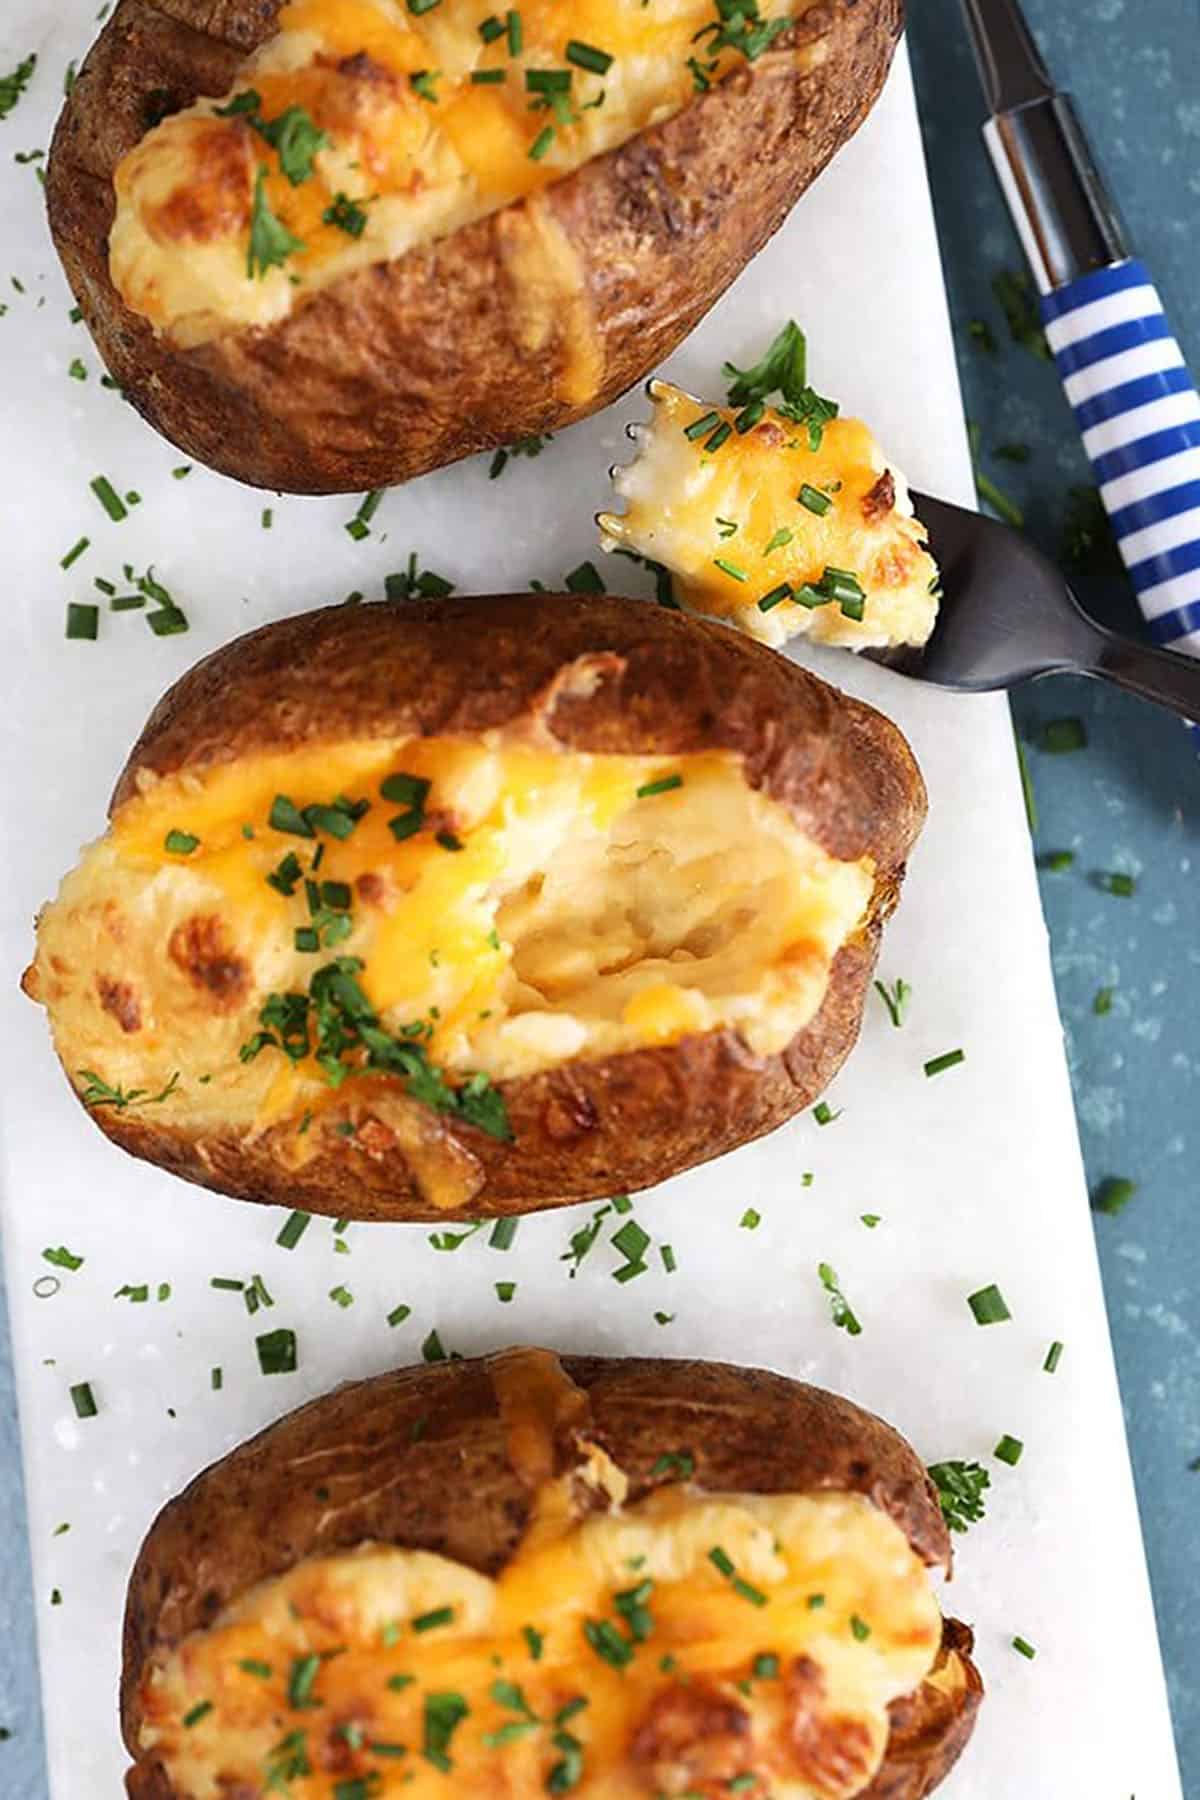 Overhead shot of twice baked potatoes on a white board with a blue and white striped fork.